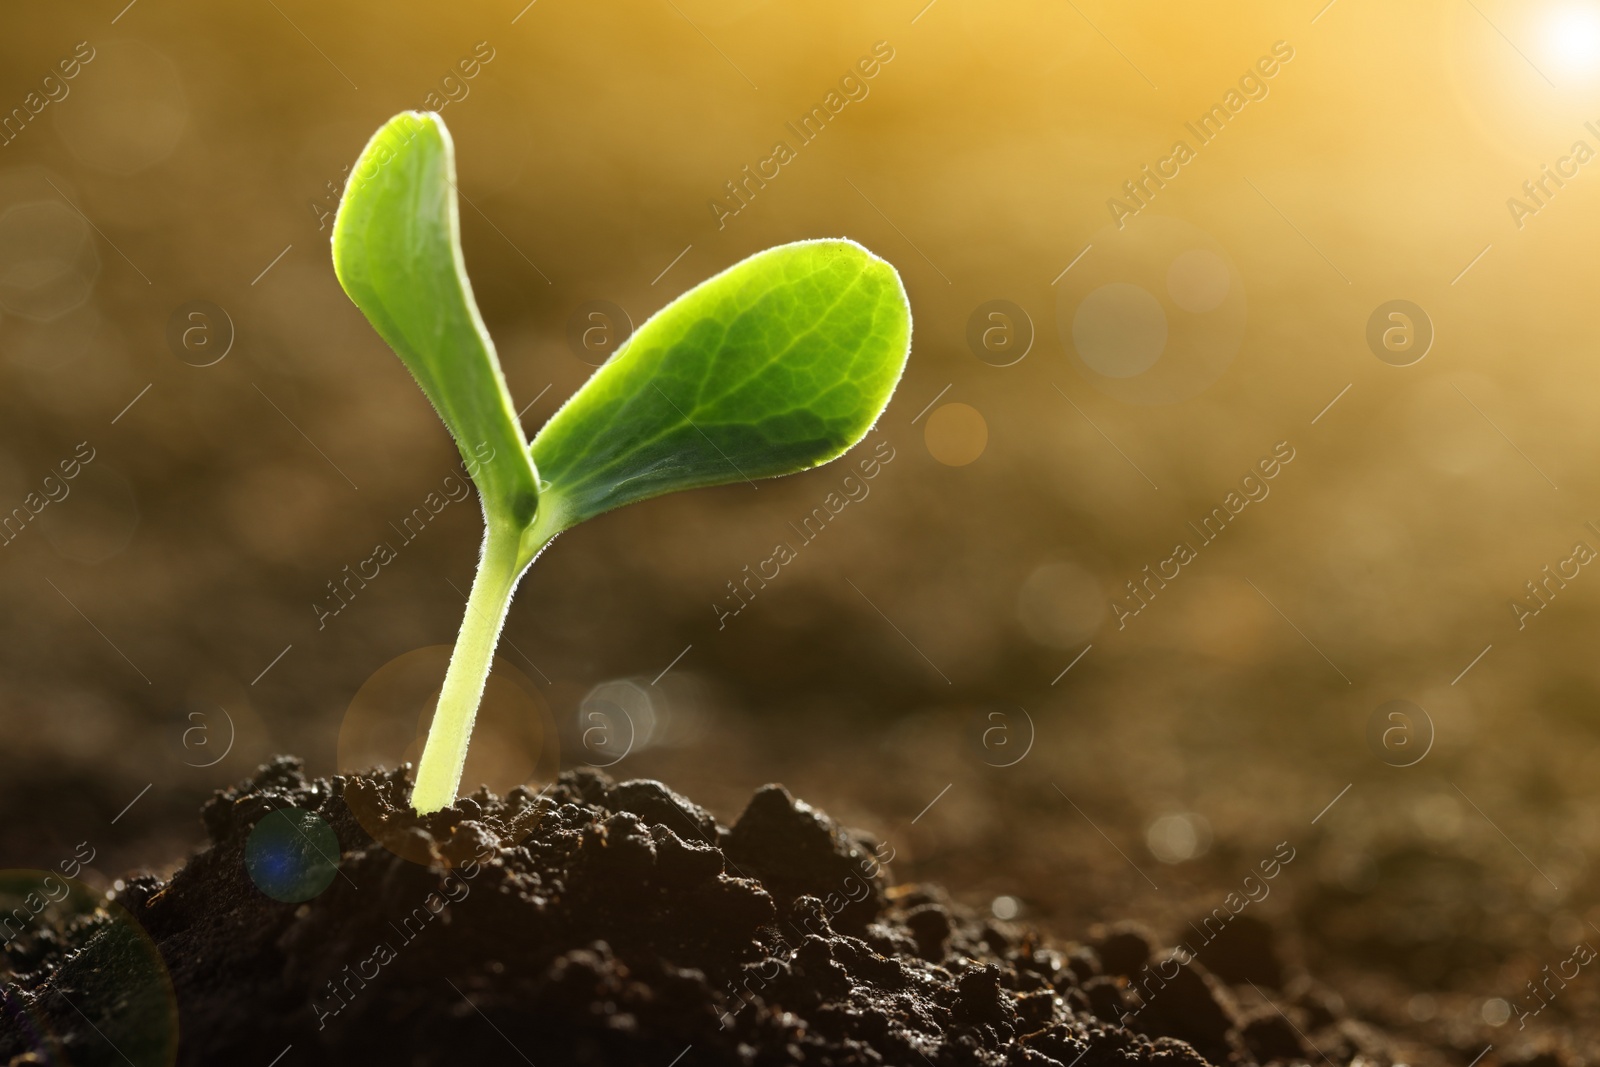 Image of Sunlit young vegetable plant grown from seed in soil, closeup